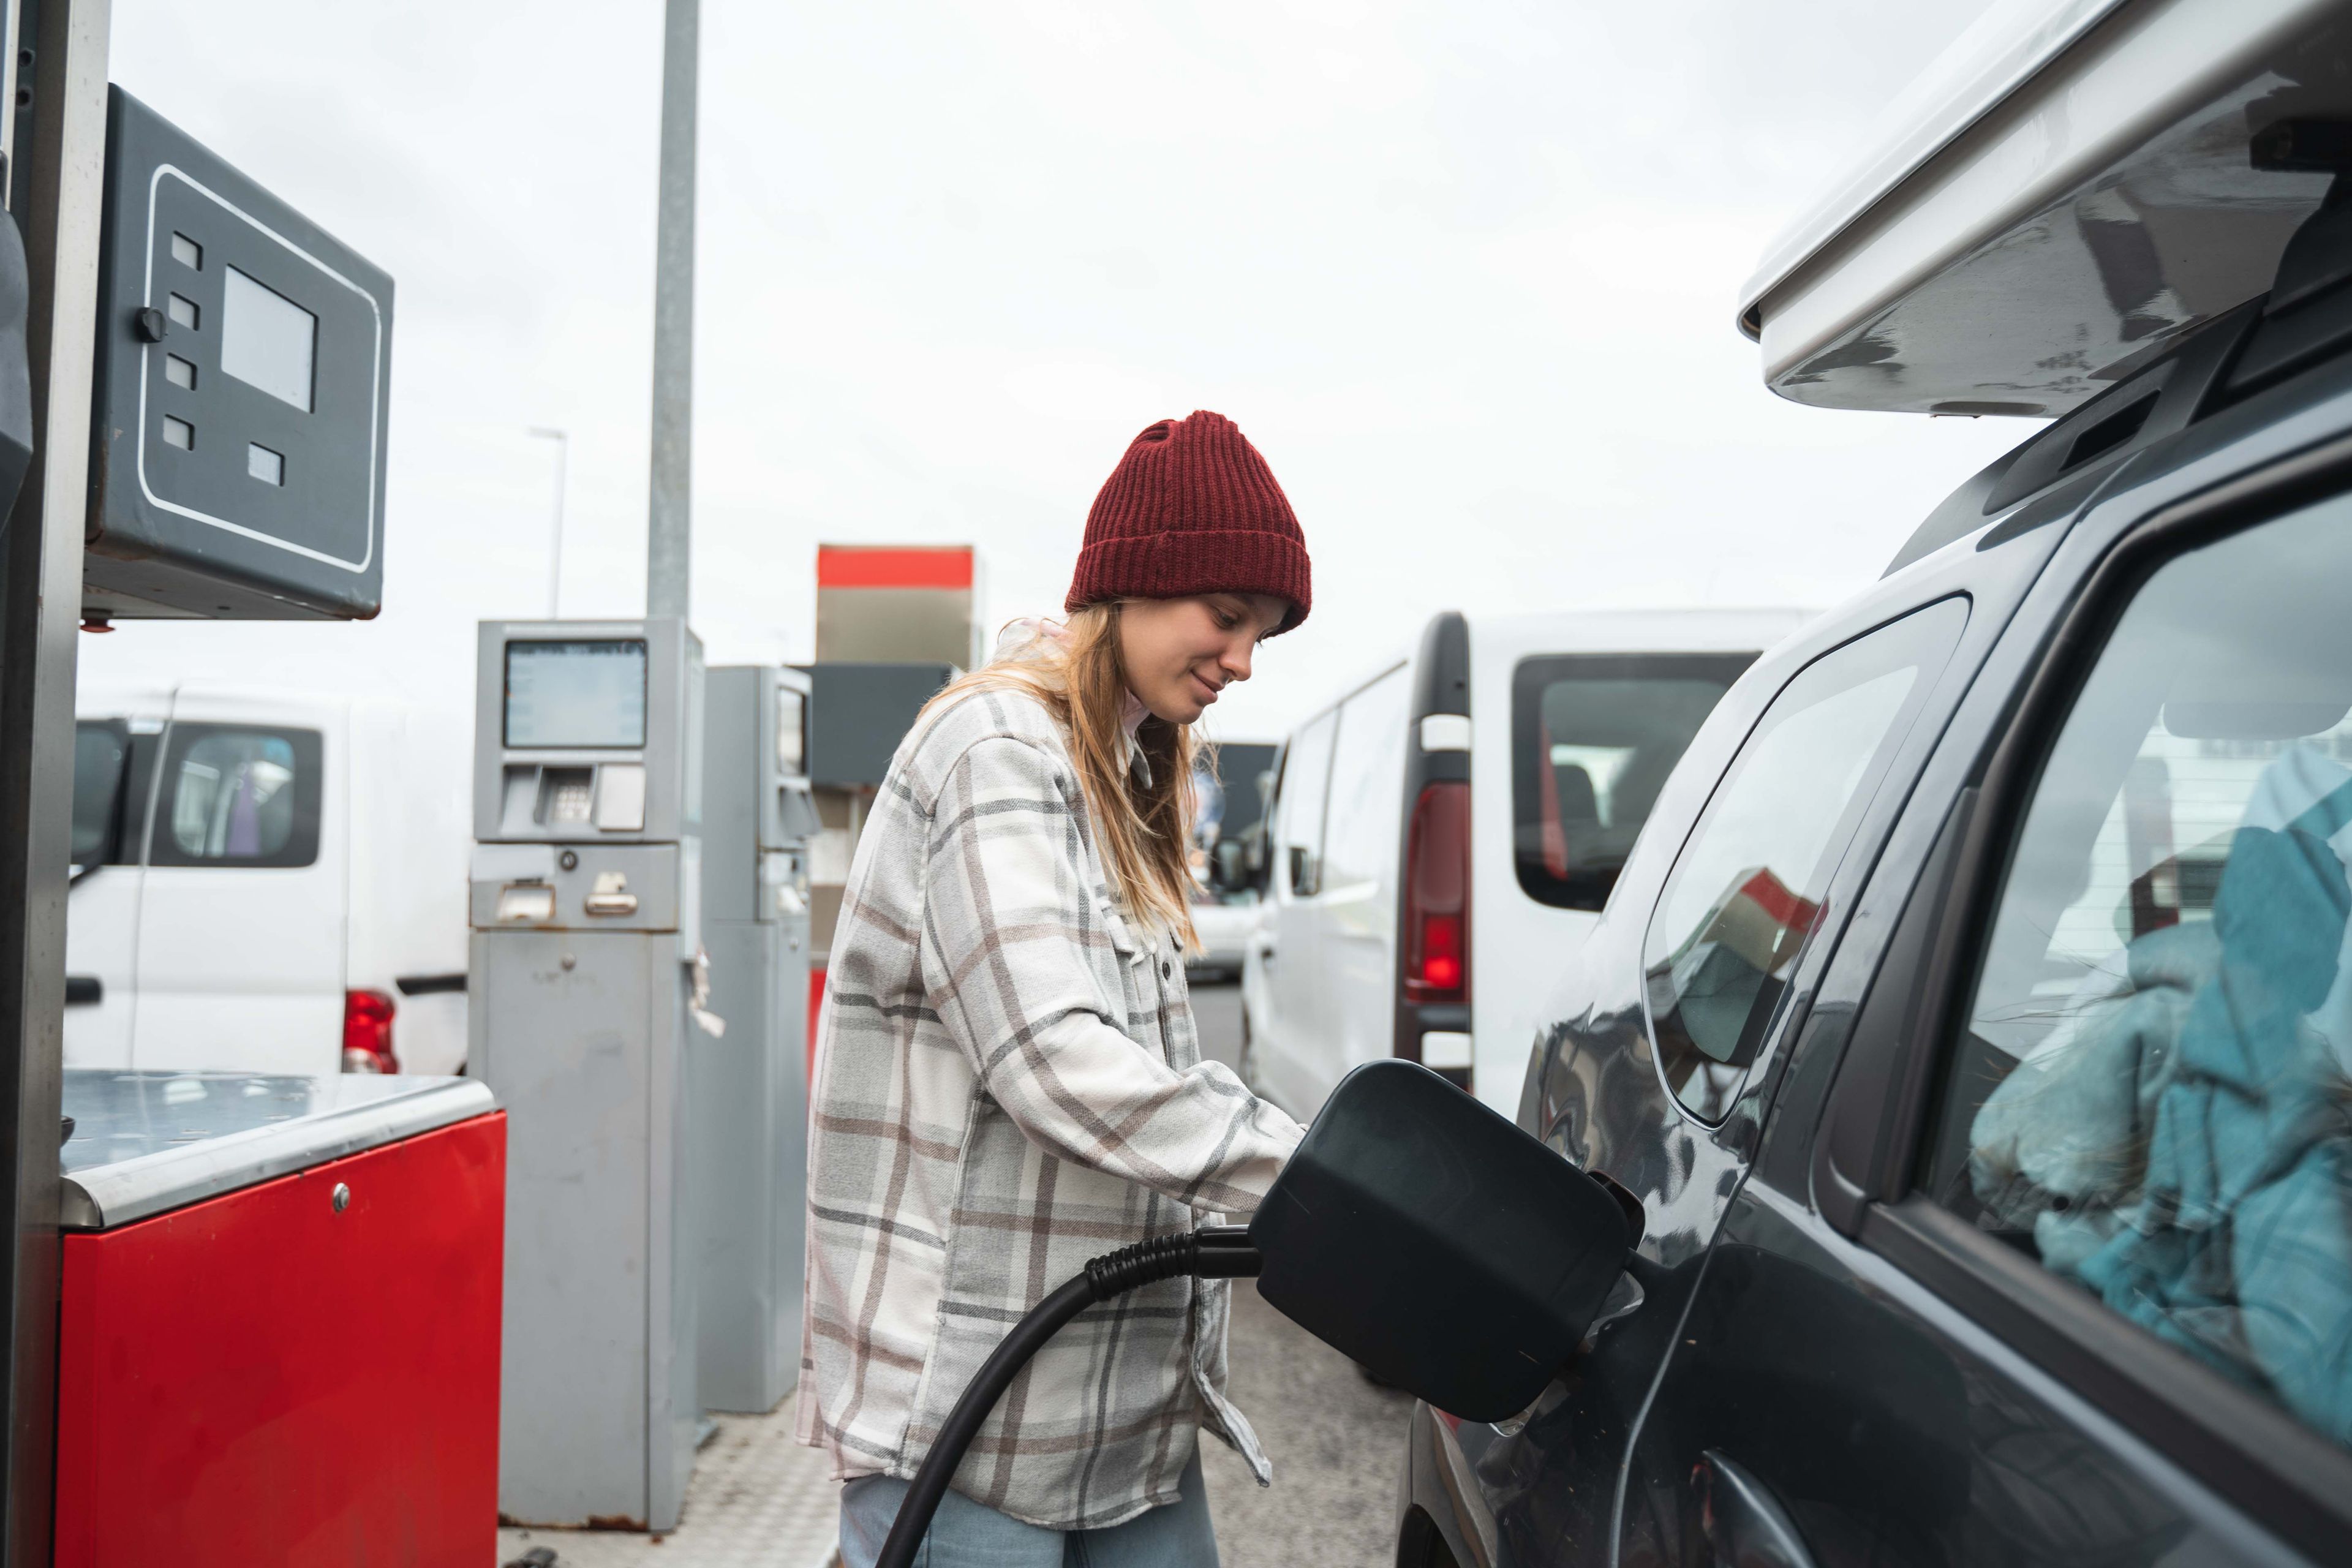 Woman refilling a rental car with fuel at the gas station in iceland